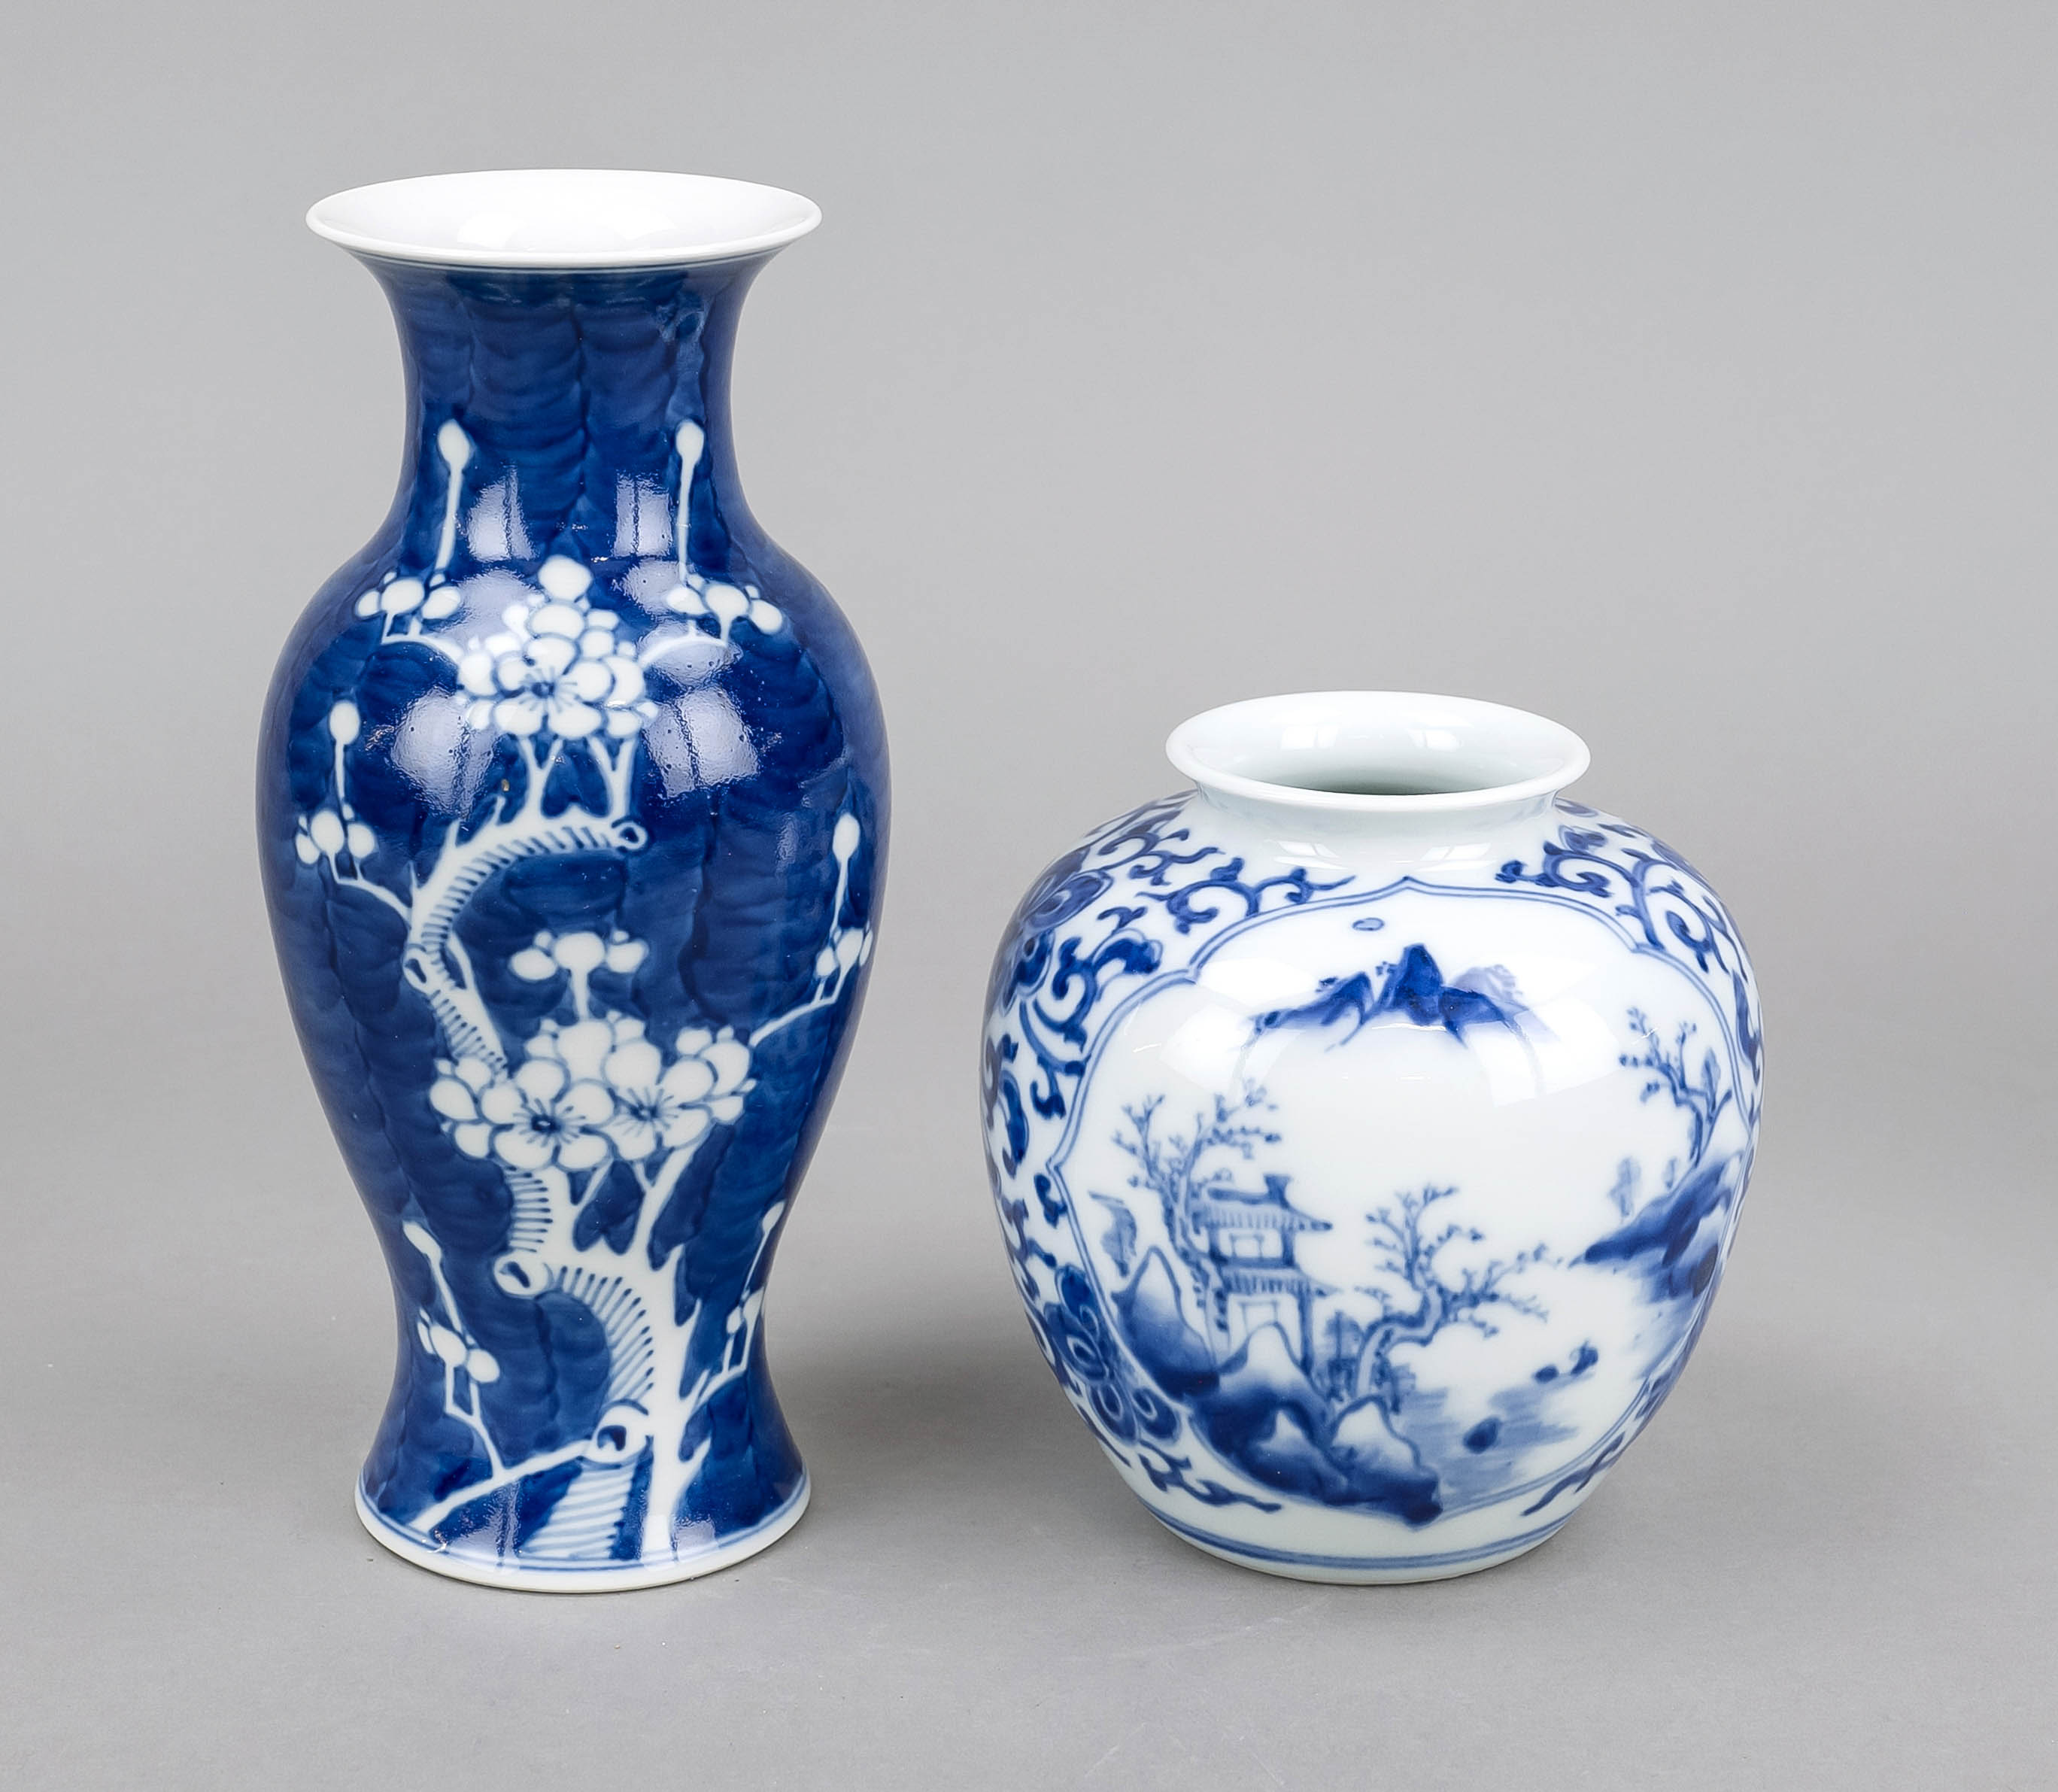 2 vases, China, 19th/20th century, 1 small prunus vase with surrounding cobalt blue decoration, a - Image 2 of 3